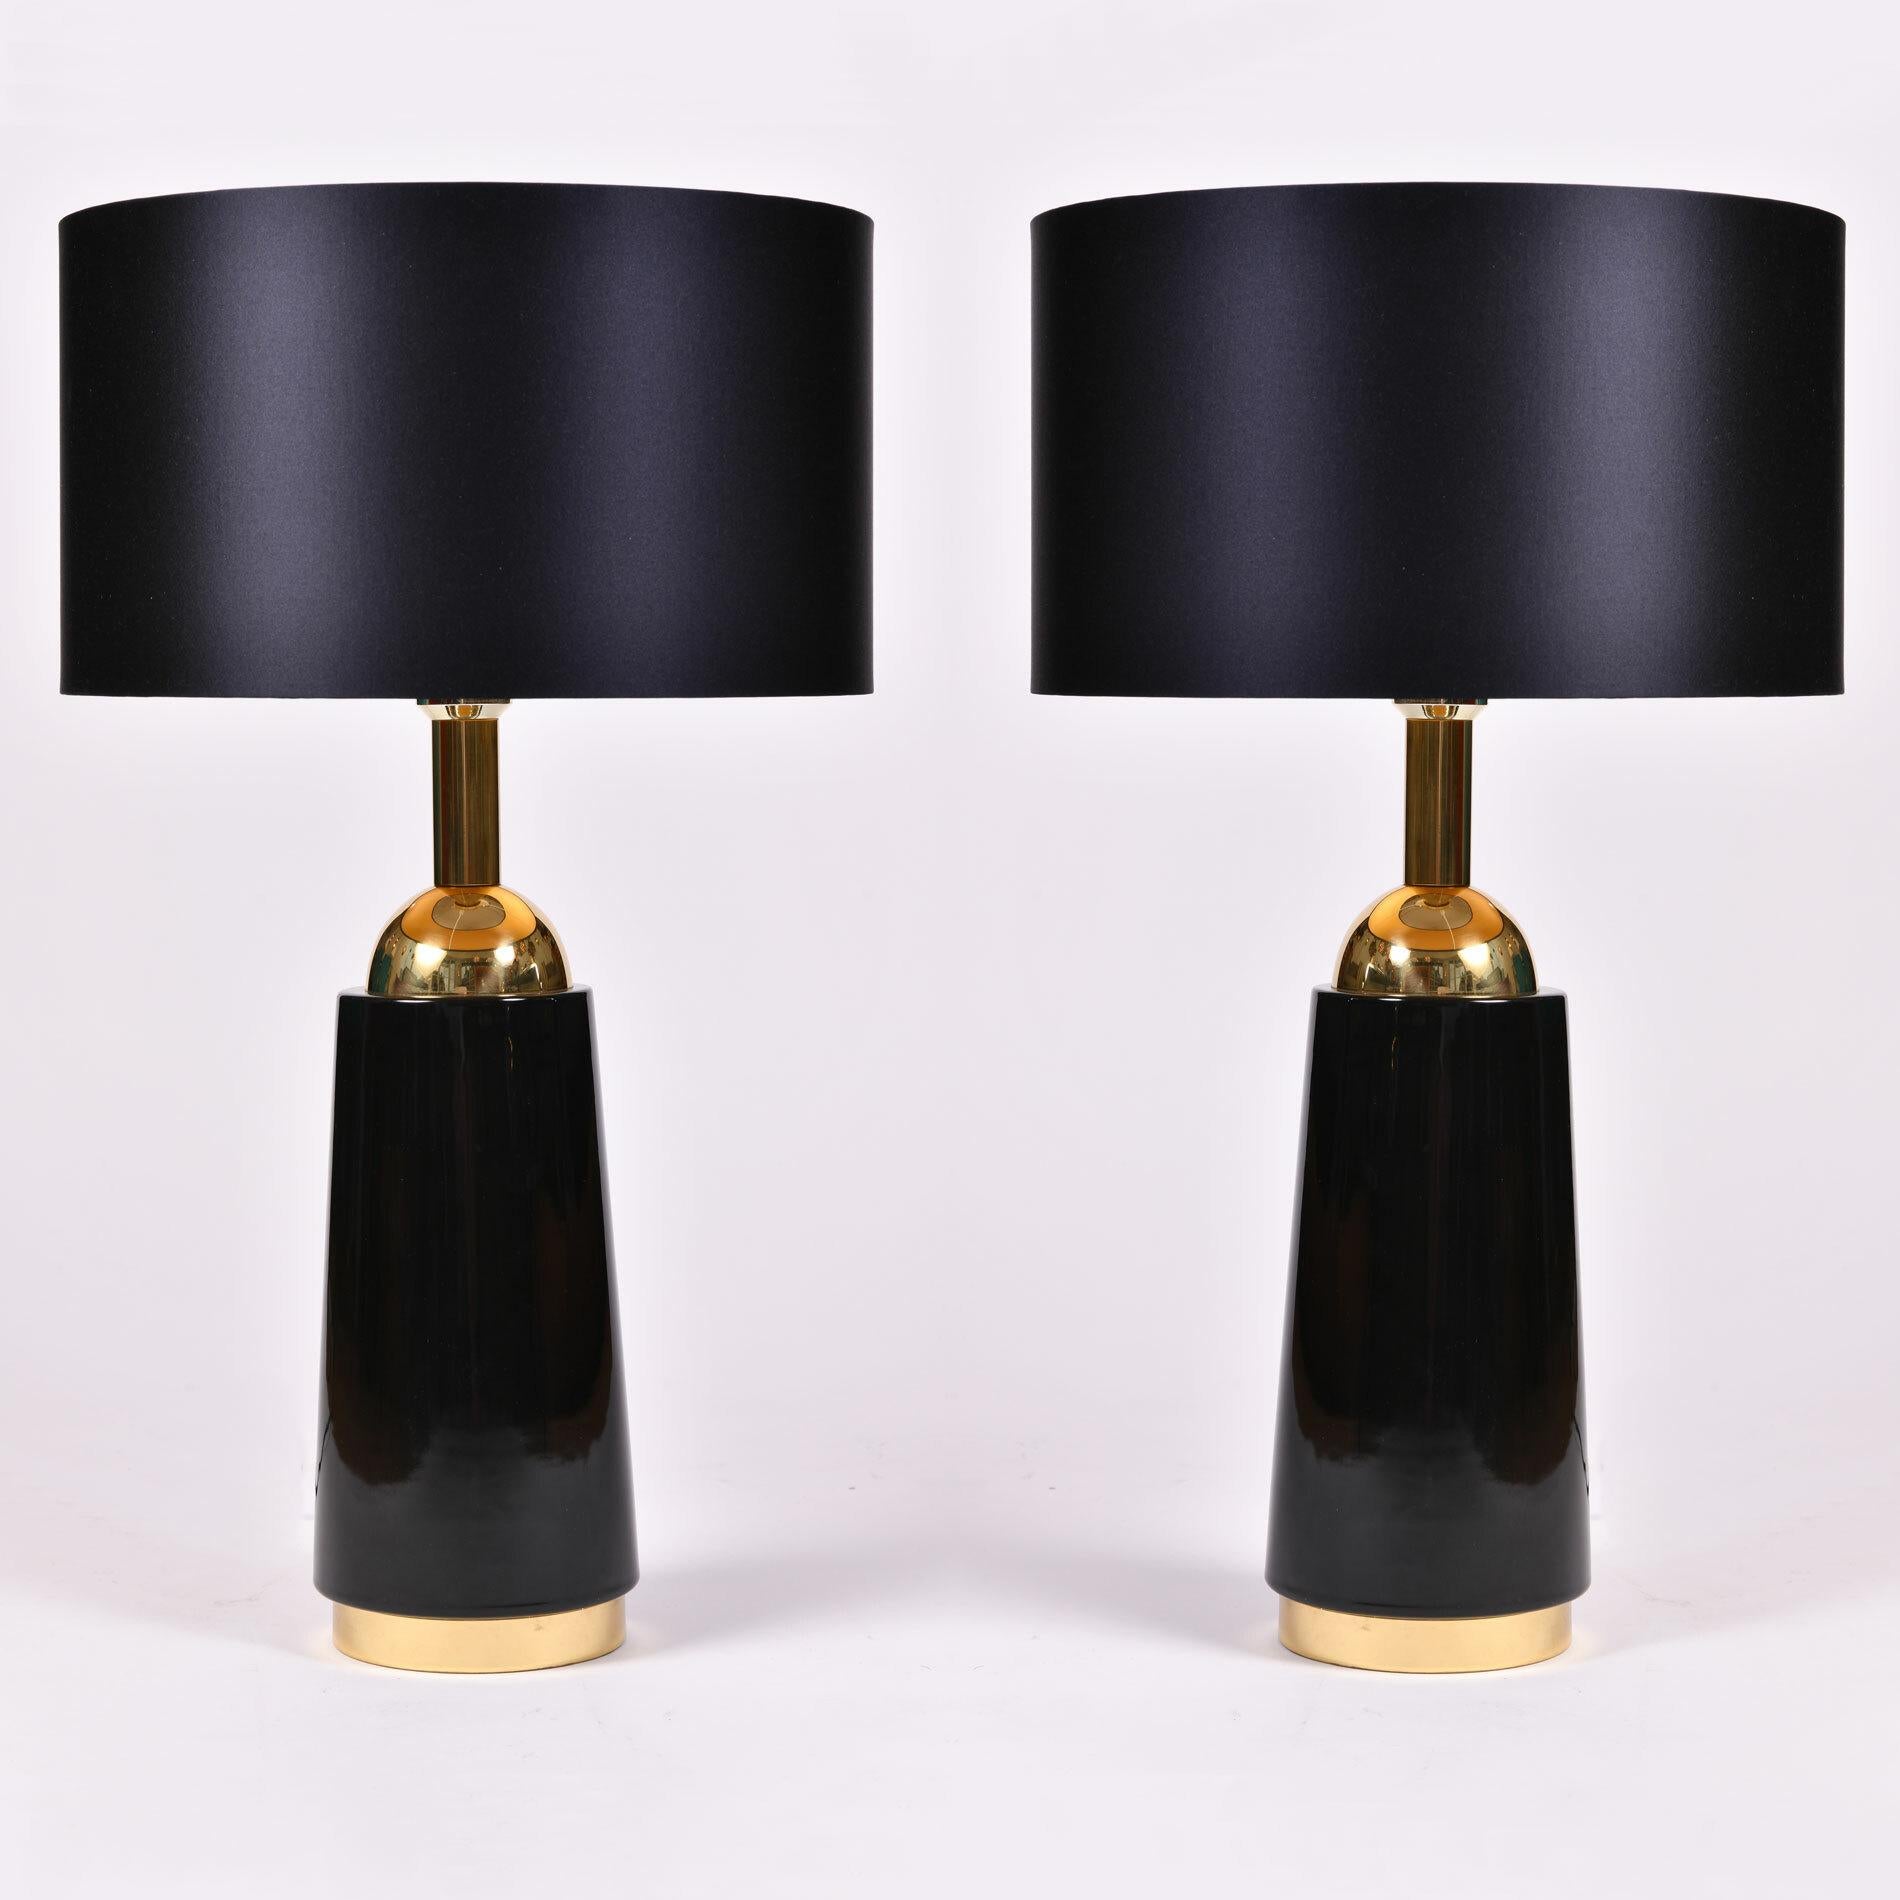 Elegant pair of Bergboms table lamps. Simple black glass base is trimmed with inset brass base and curved brass top and fitting. 

Please note with the lampshade the total height is 60.5cm and diameter is 36cm.